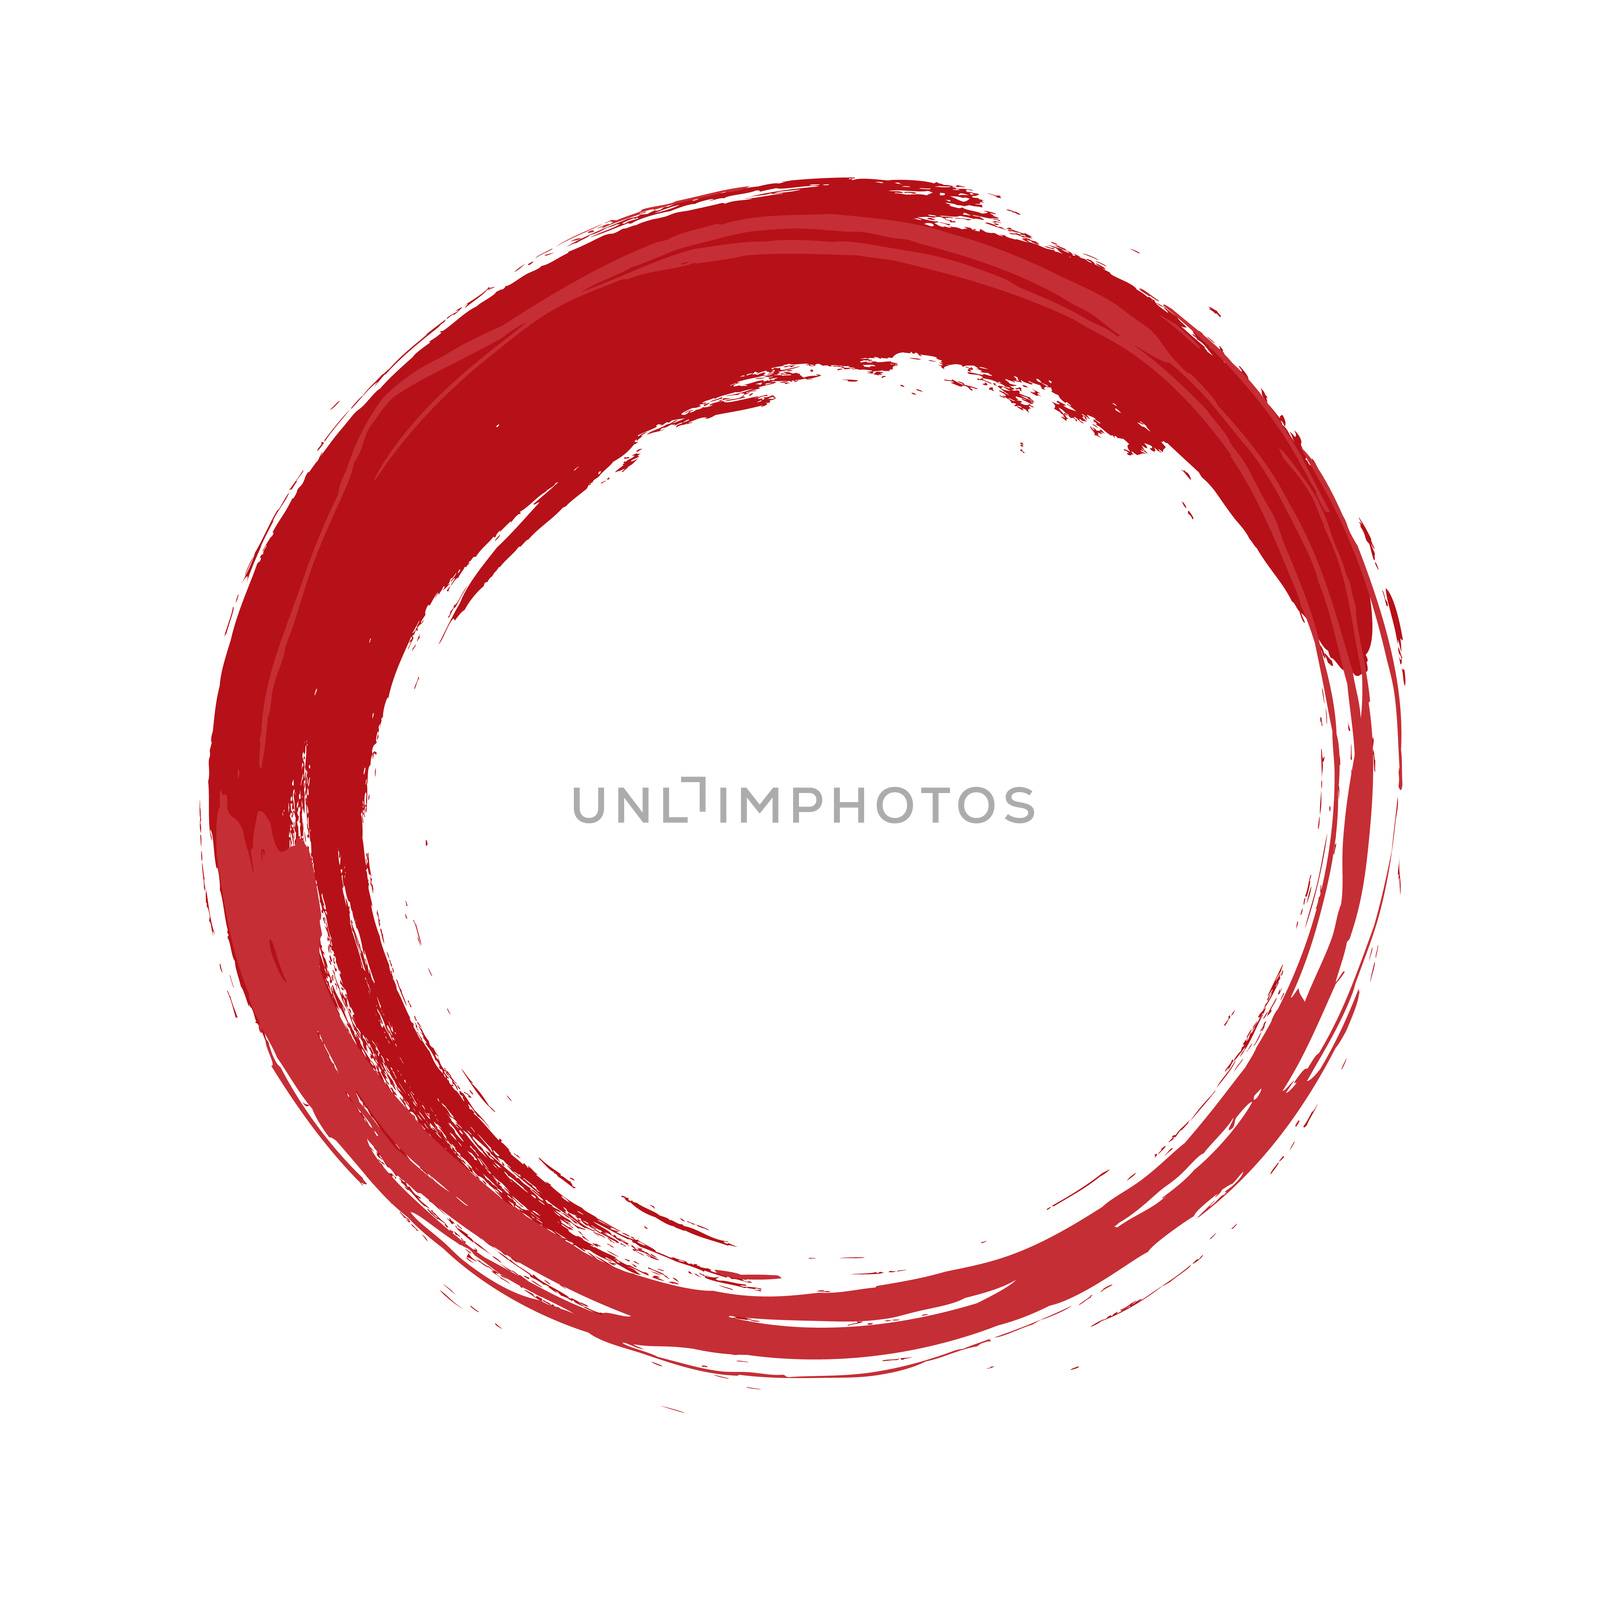 An image of a painted red circle